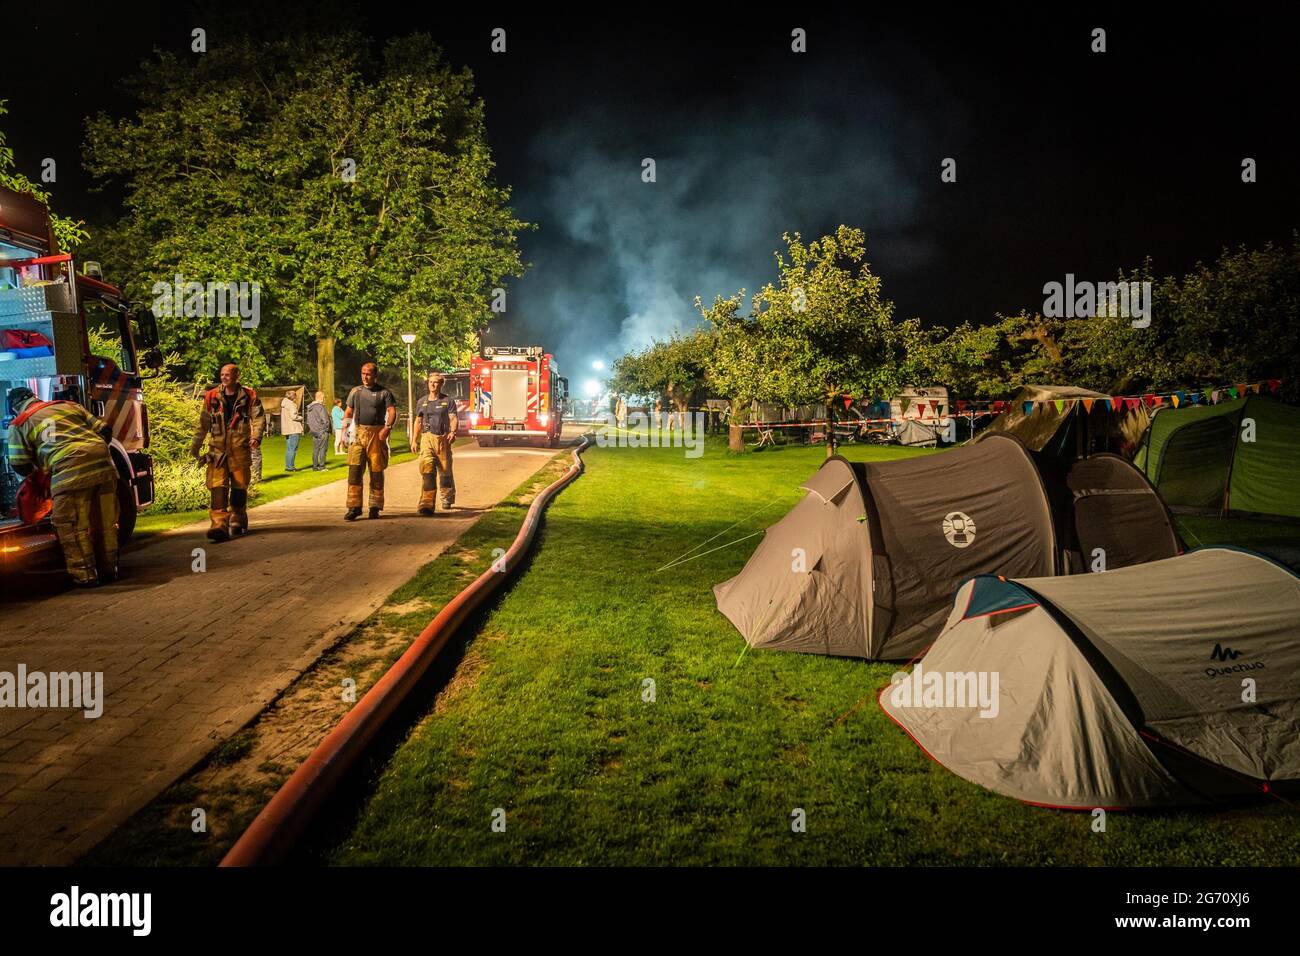 Bunnik, Netherlands. 10th July, 2021. BUNNIK, 10-07-2021, Large fire in the  kitchen of a restaurant at a campingside in Bunnik. No one got injured, but  the fire department will be on the